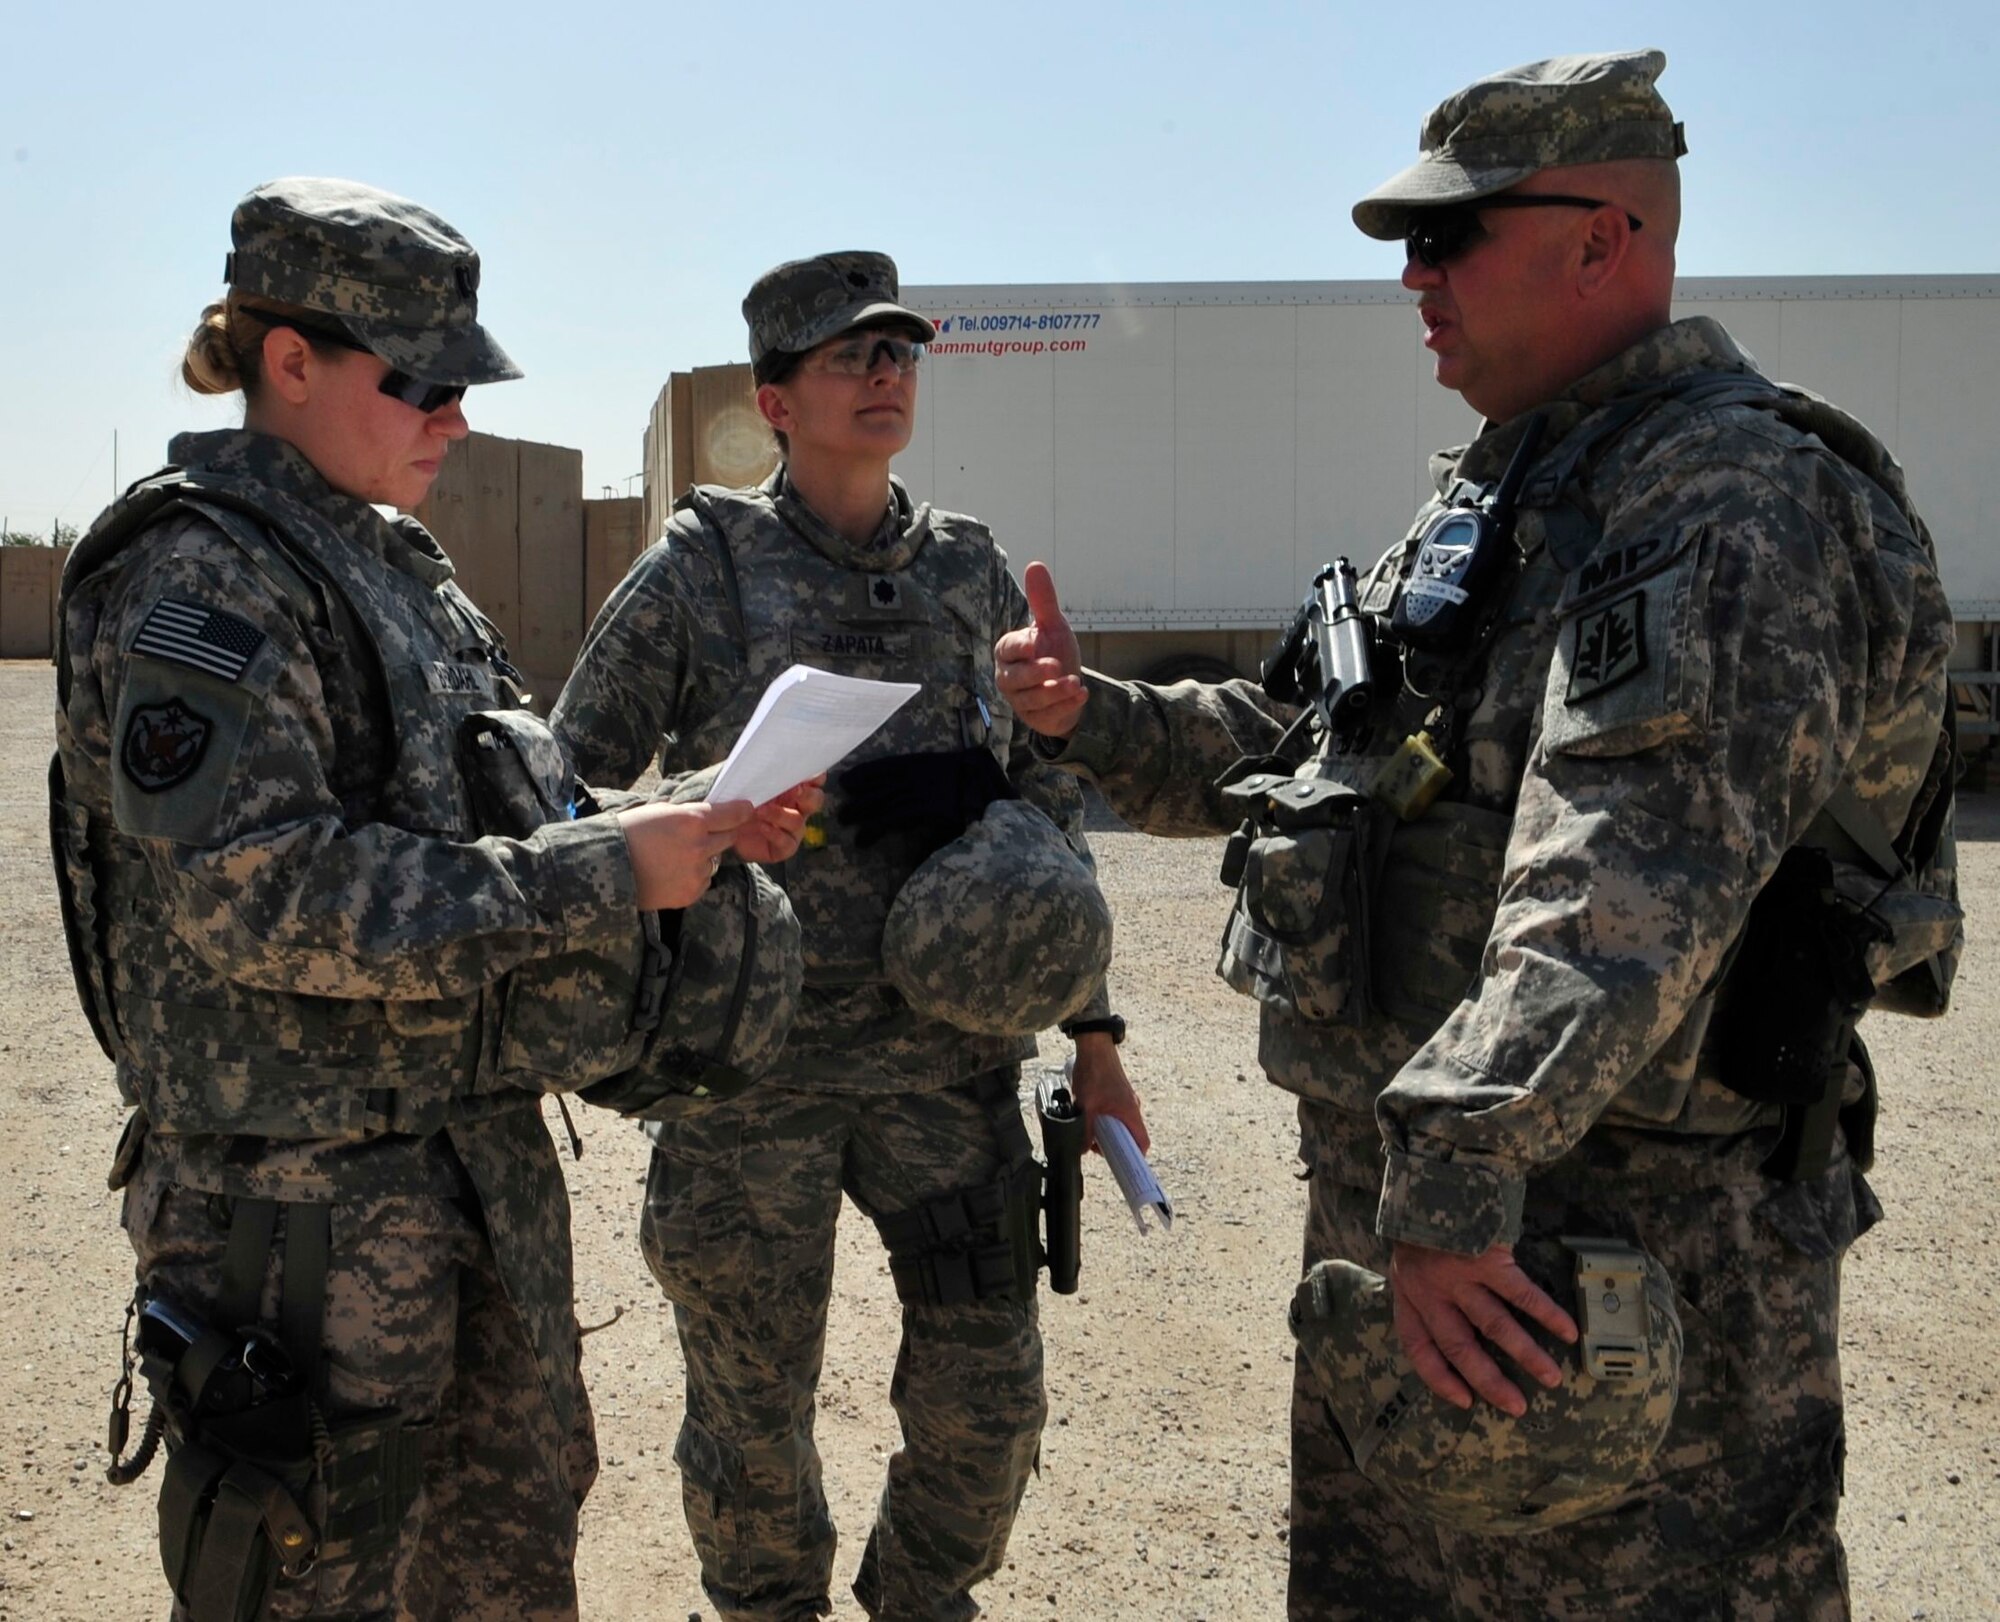 From left to right, U.S. Army Capt. Kristen Berdahl, U.S. Air Force Lt. Col. Kaylin Haywood Zapata and U.S. Army 1st Sgt. Ed Hammond discuss preparation for a mission at Joint Security Station Shield, Iraq, April 6, 2011. Before going outside-the-wire to assess the conditions at a women’s prison in Baghdad’s Rusafa District, these members of the corrections assistance transition team go over checklists of questions they will ask Iraqi officials at the facility. (U.S. Air Force photo by Senior Master Sgt. Larry A. Schneck/Released)